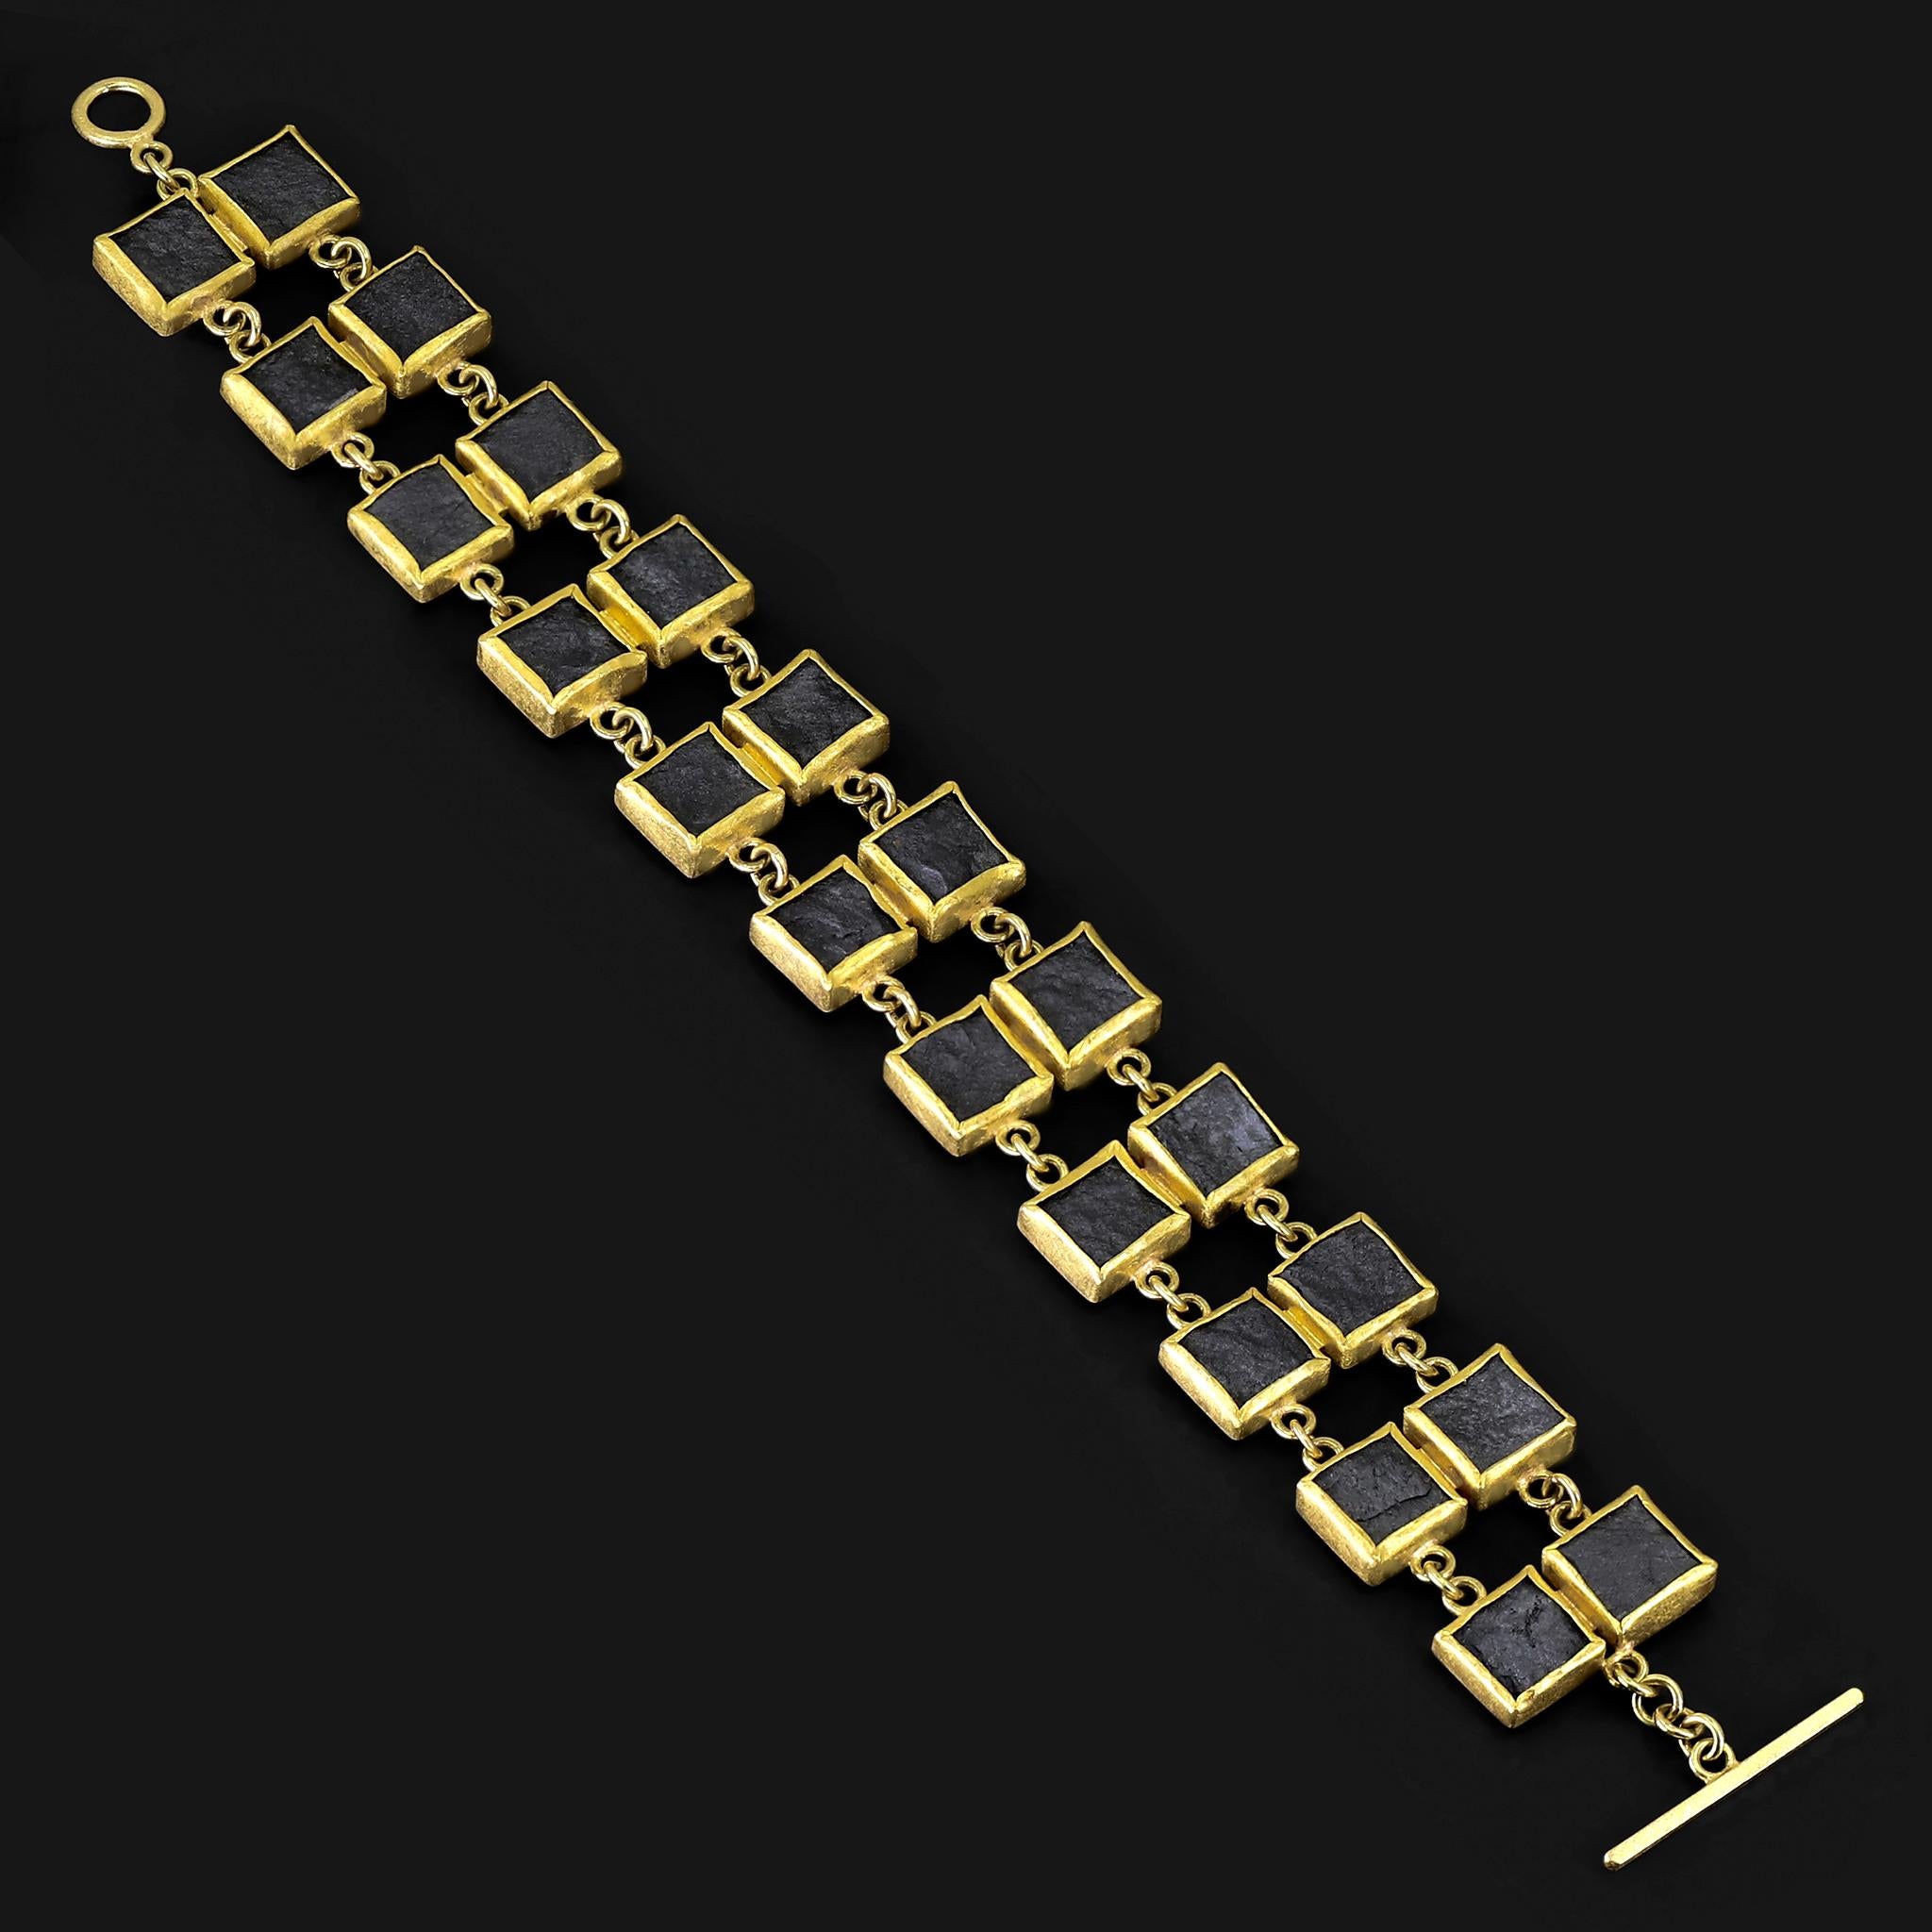 Double Hematite Links Bracelet intricately hand-fabricated by jewelry maker Petra Class featuring twenty-two natural, matte-finished hematite squares individually bezel-set in signature-finished 22k yellow gold in rows of two, and connected by 18k